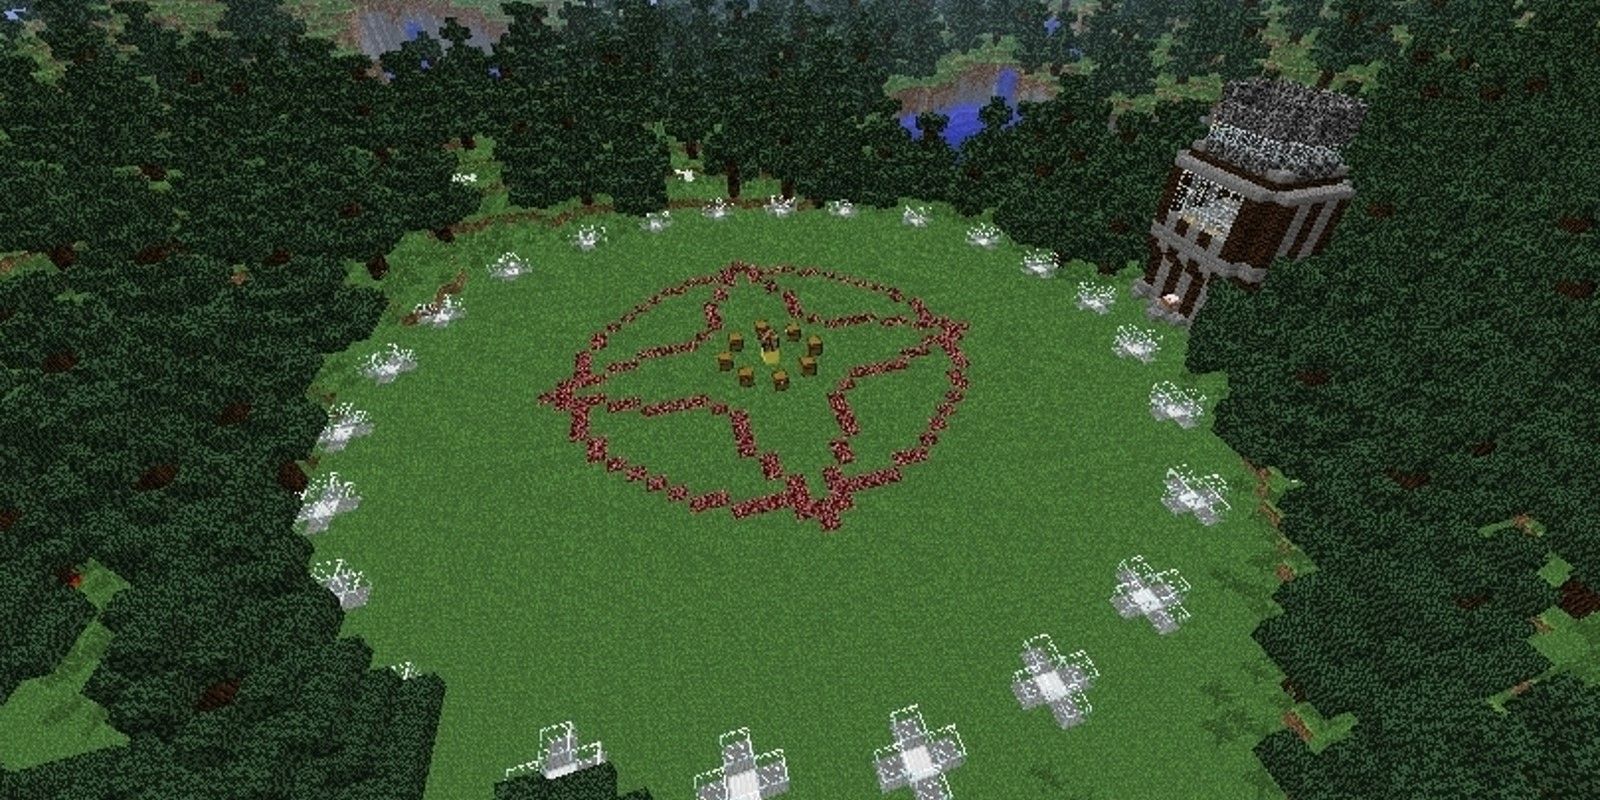 A Survival Games map in Minecraft.